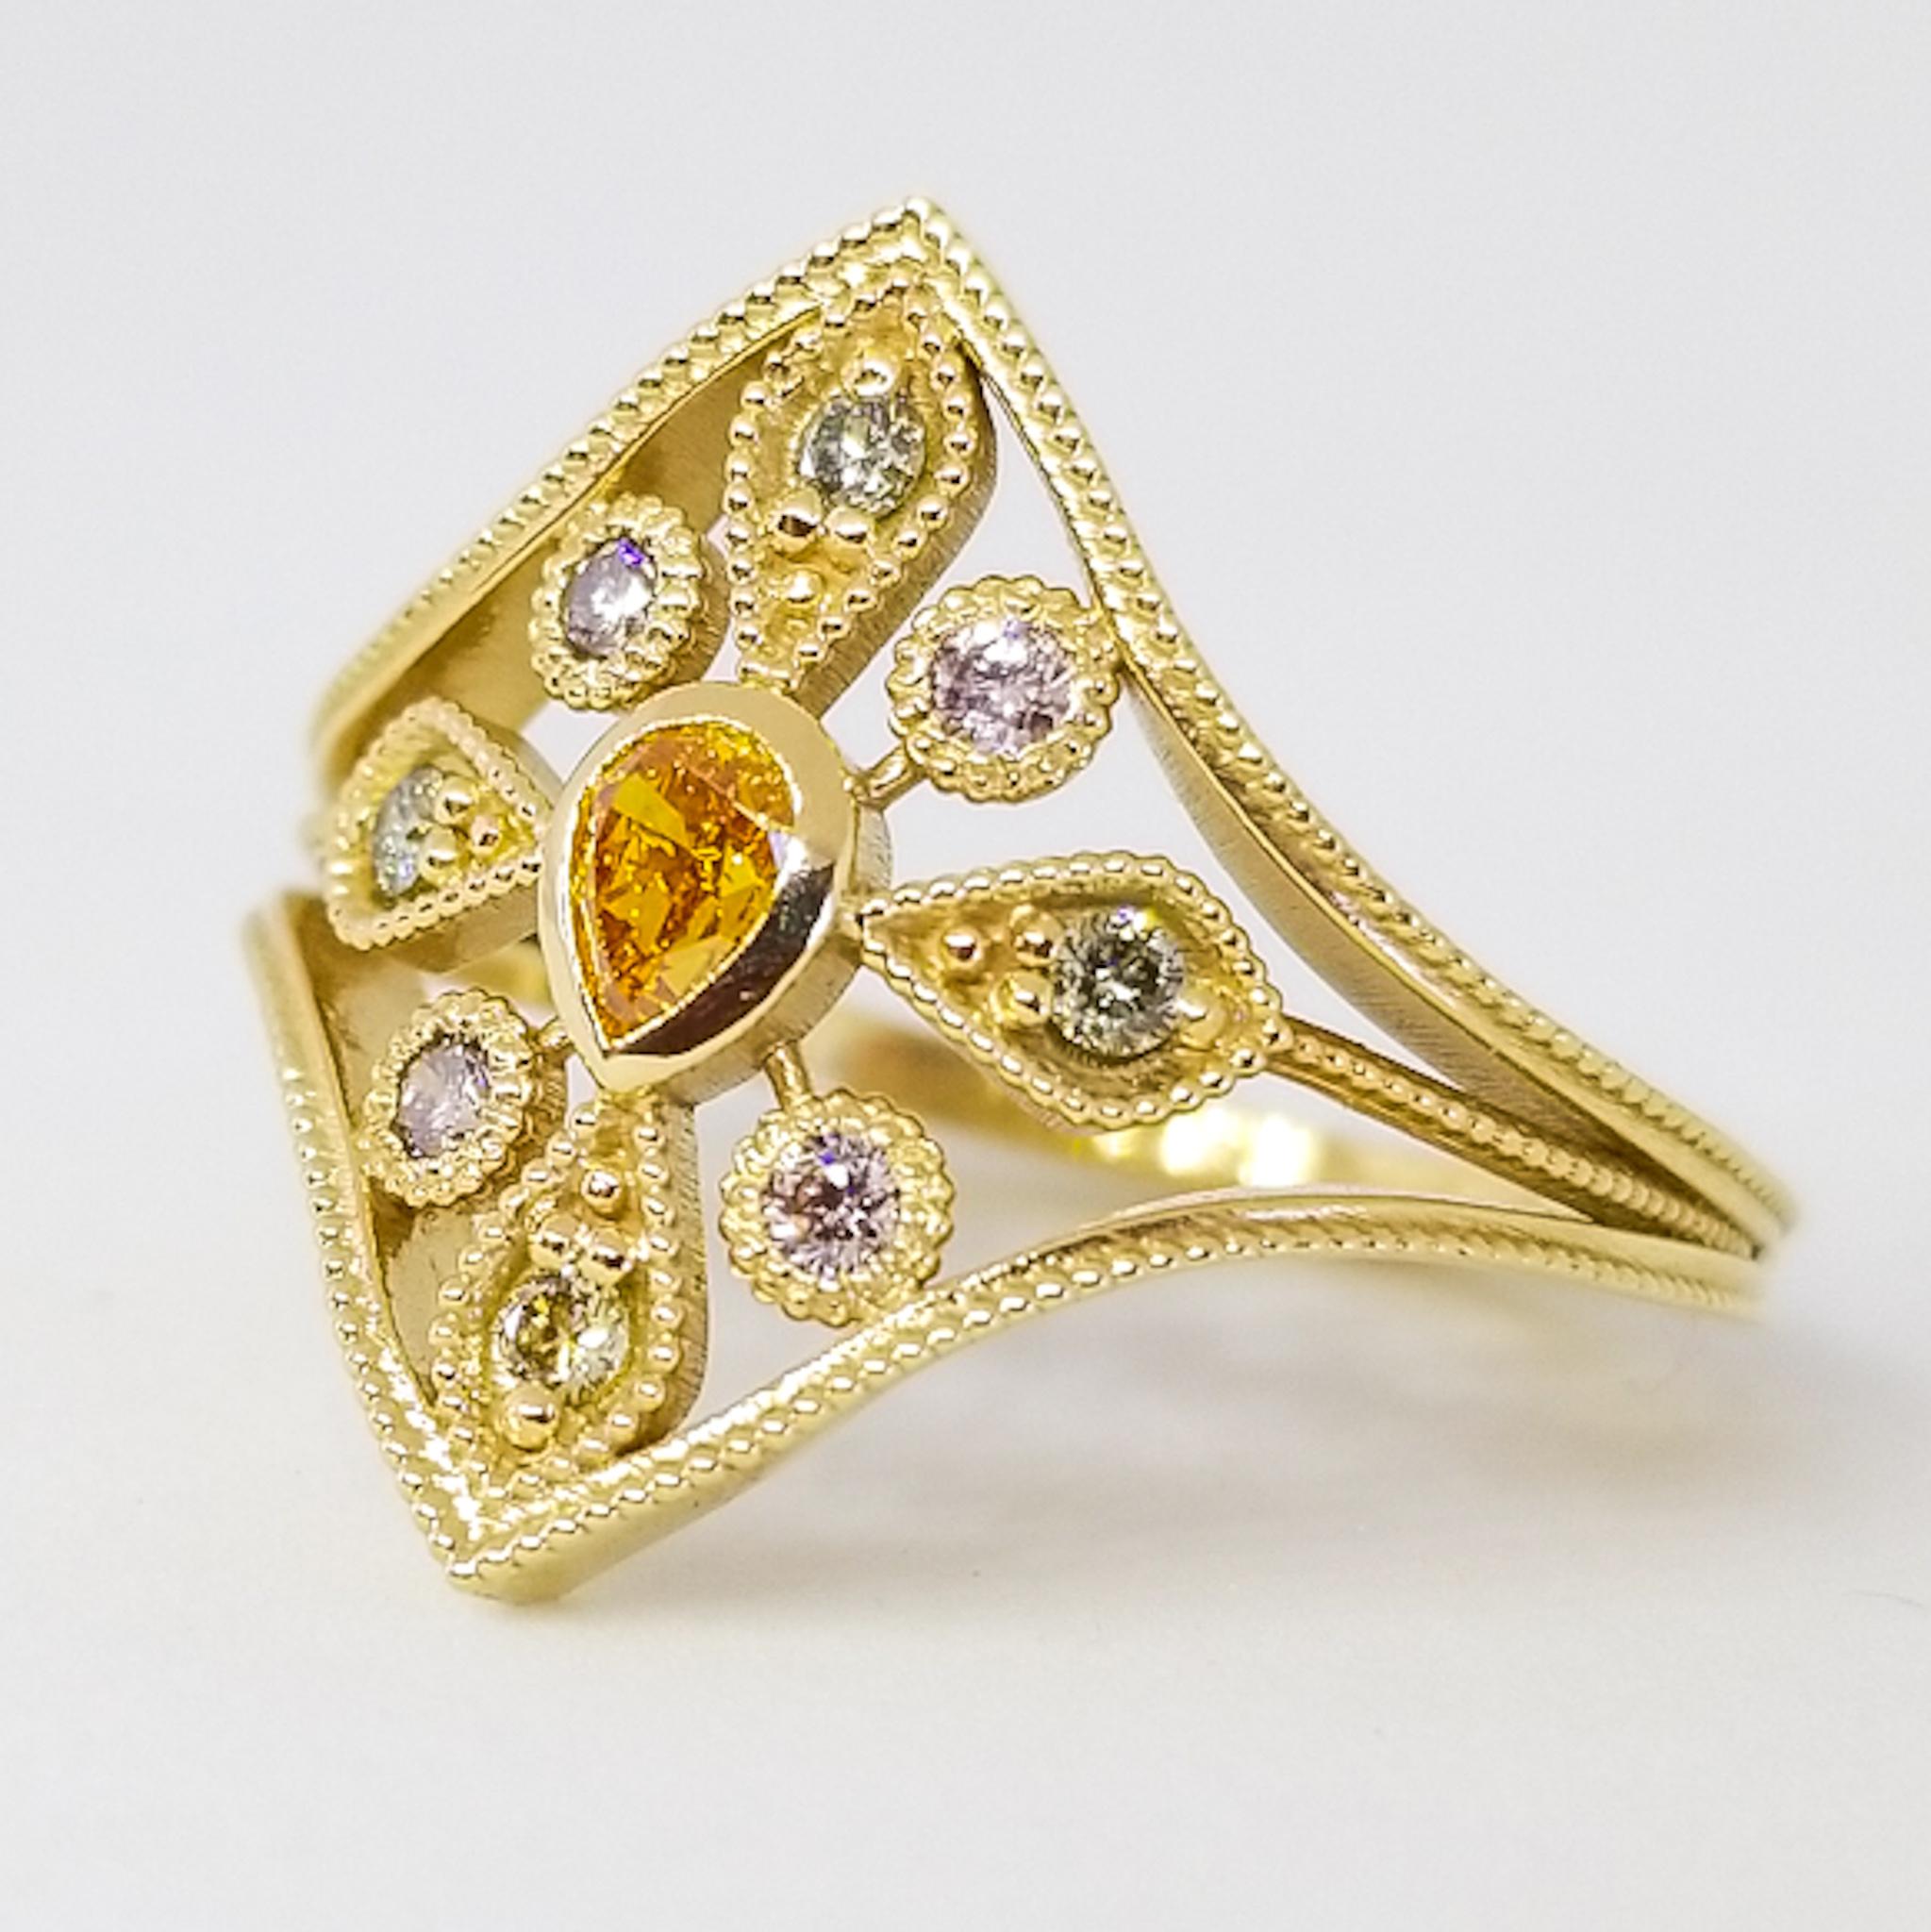 Natural Fancy Color Diamond Cluster Ring in 18 Karat Yellow Gold. This one of a kind Ring features a Suite of nine, Natural Fancy Color Diamonds. The center stone is a bezel set, Pear shape Natural Vivid Orange Diamond. Set around the center stone